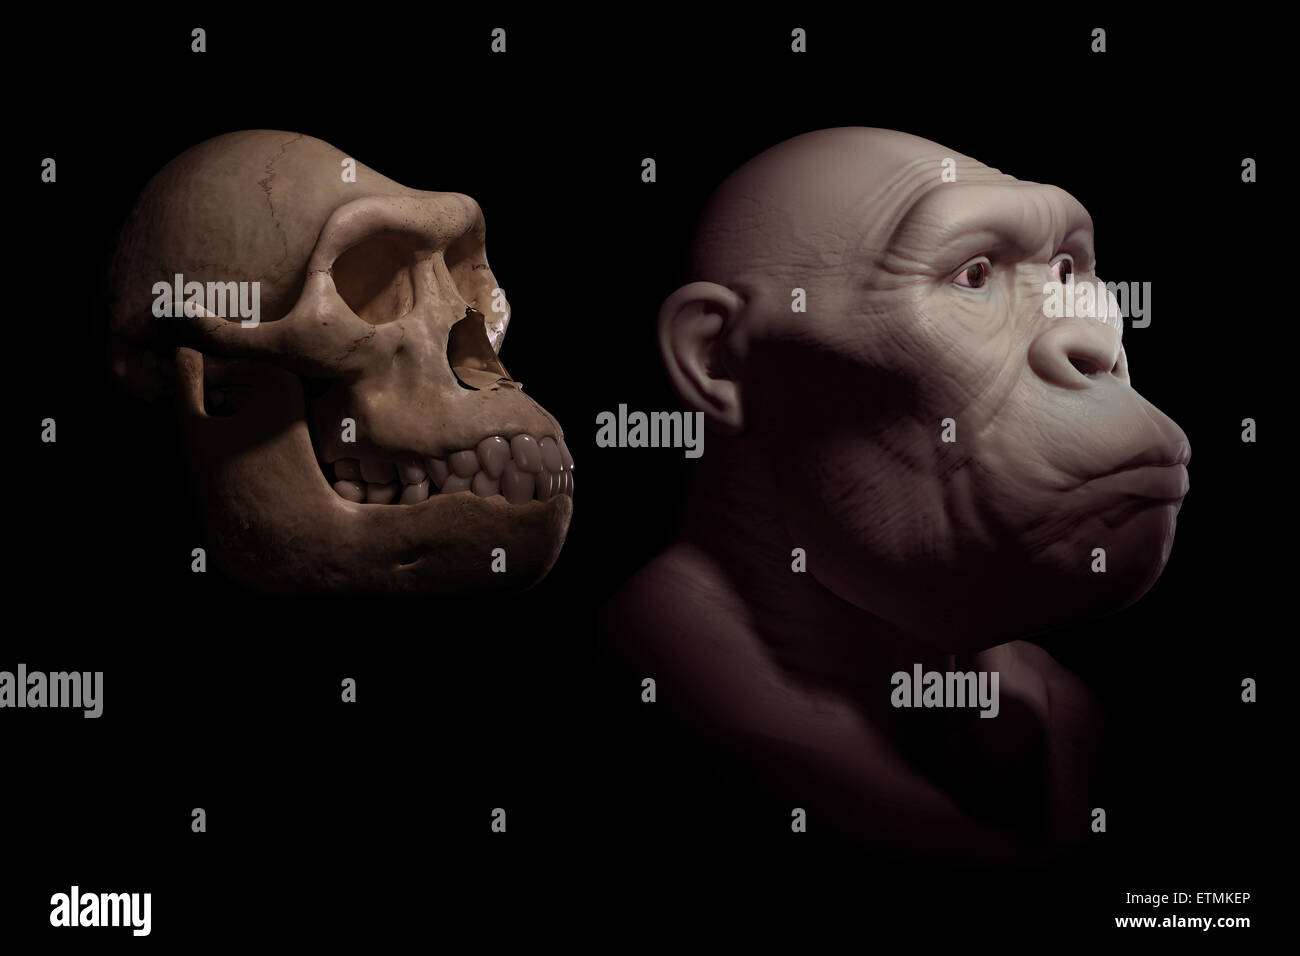 Depiction of an Australopithecus next to an Australopithecus skull for comparison.  Australopithecus is an extinct genus of hominids and early ancestor to Homo Sapiens. Stock Photo